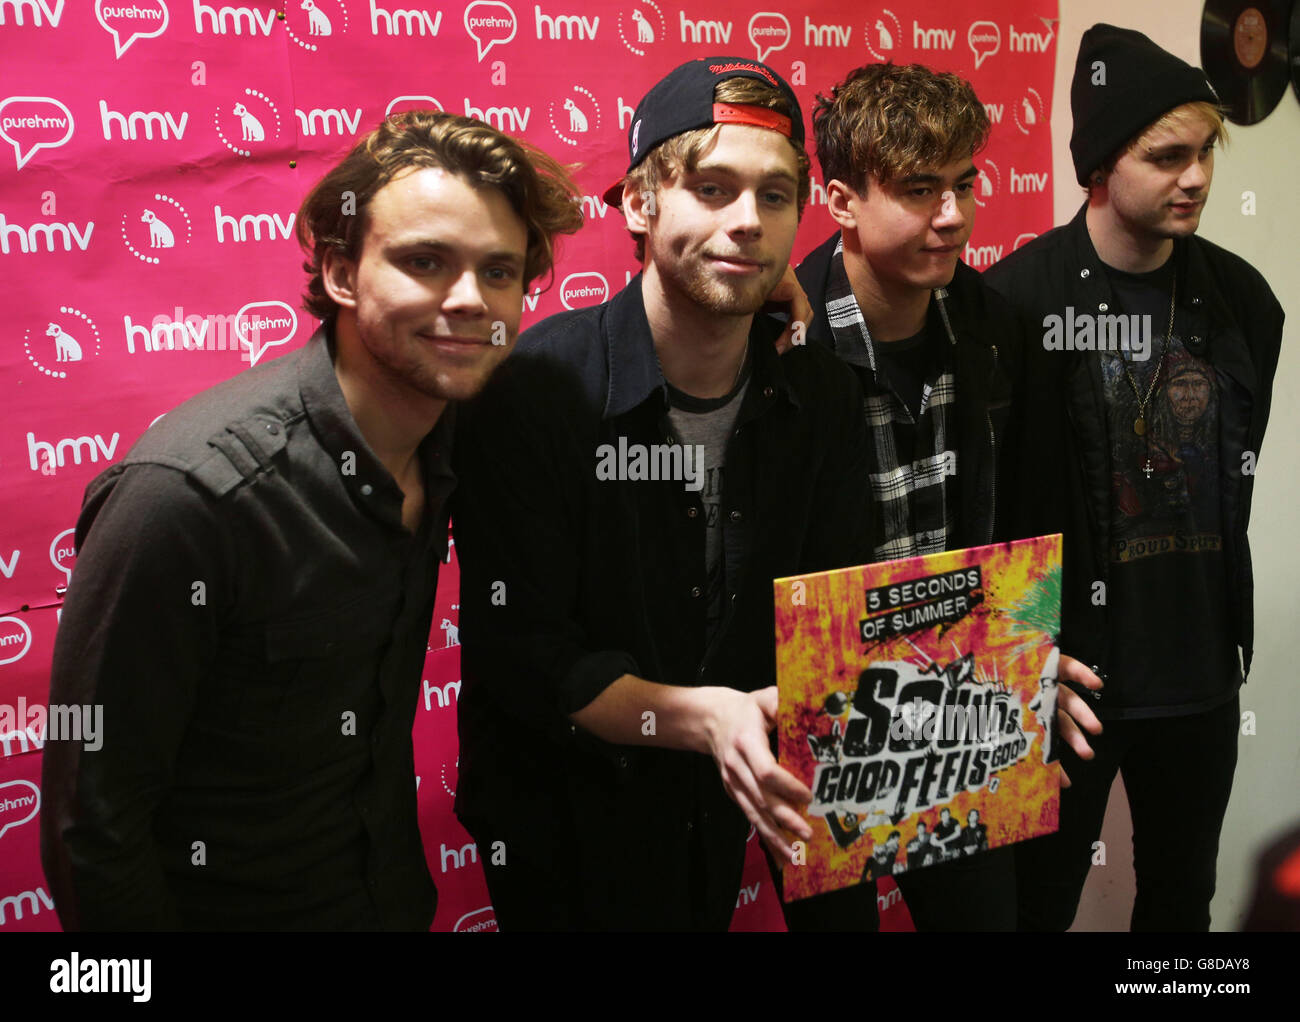 Australian band 5 Seconds of Summer (left to right) Ashton Irwin, Luke Hemmings, Calum Hood and Michael Clifford during a signing session at HMV Glasgow for their new album, Sounds Good Feel Good. Stock Photo